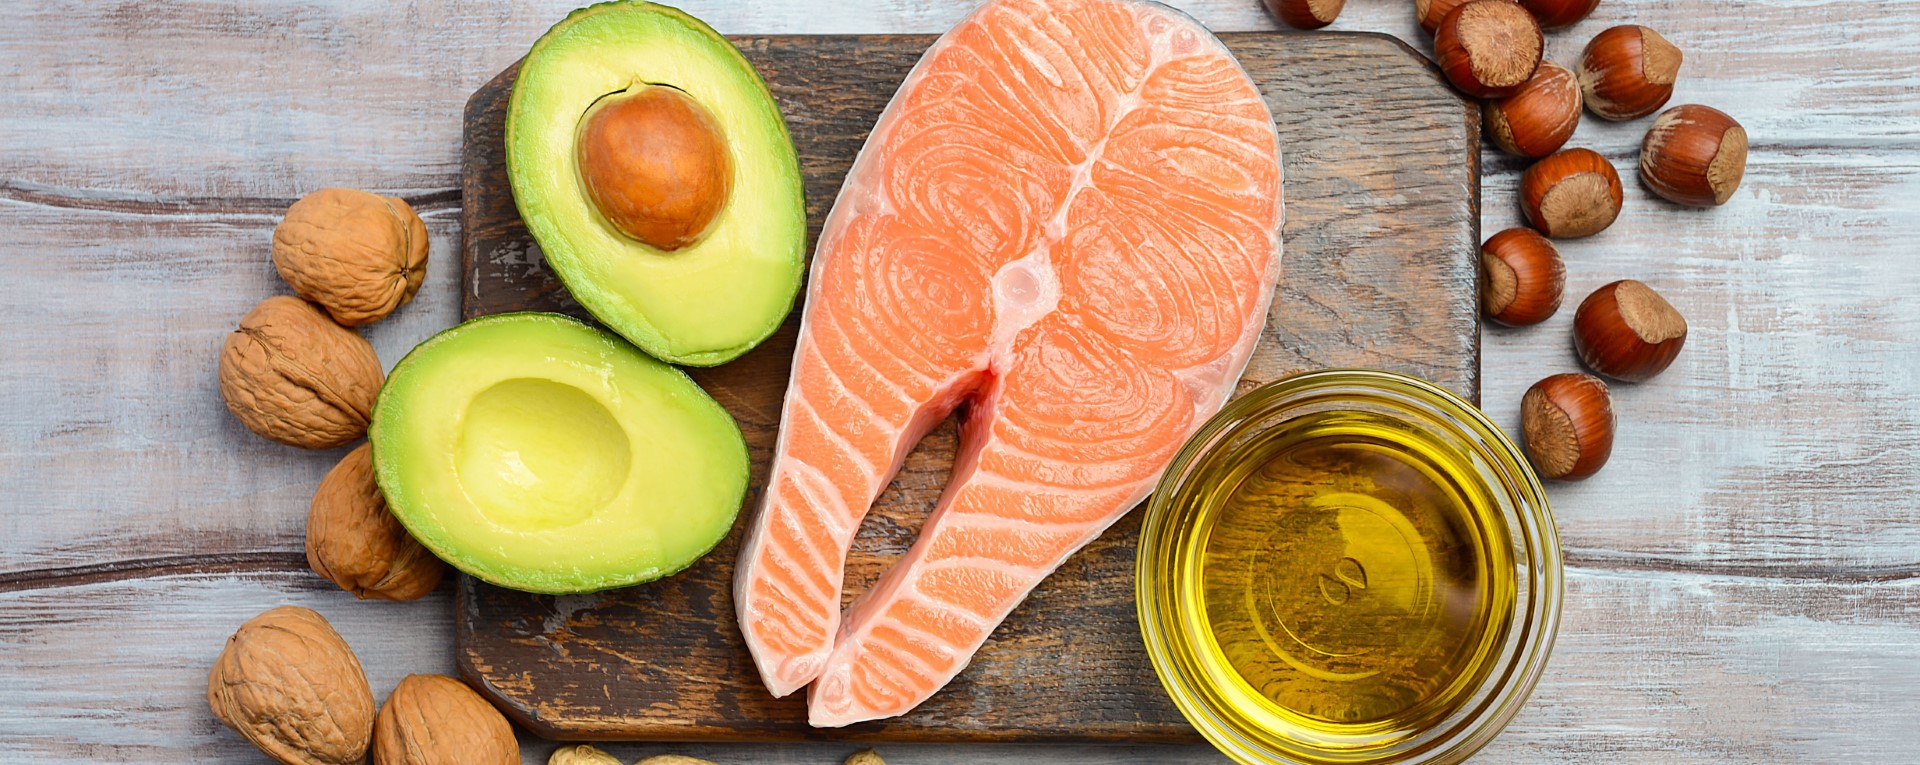 Healthy assortment of healthy protein such as nuts, avocados, olive oil and wild salmon 